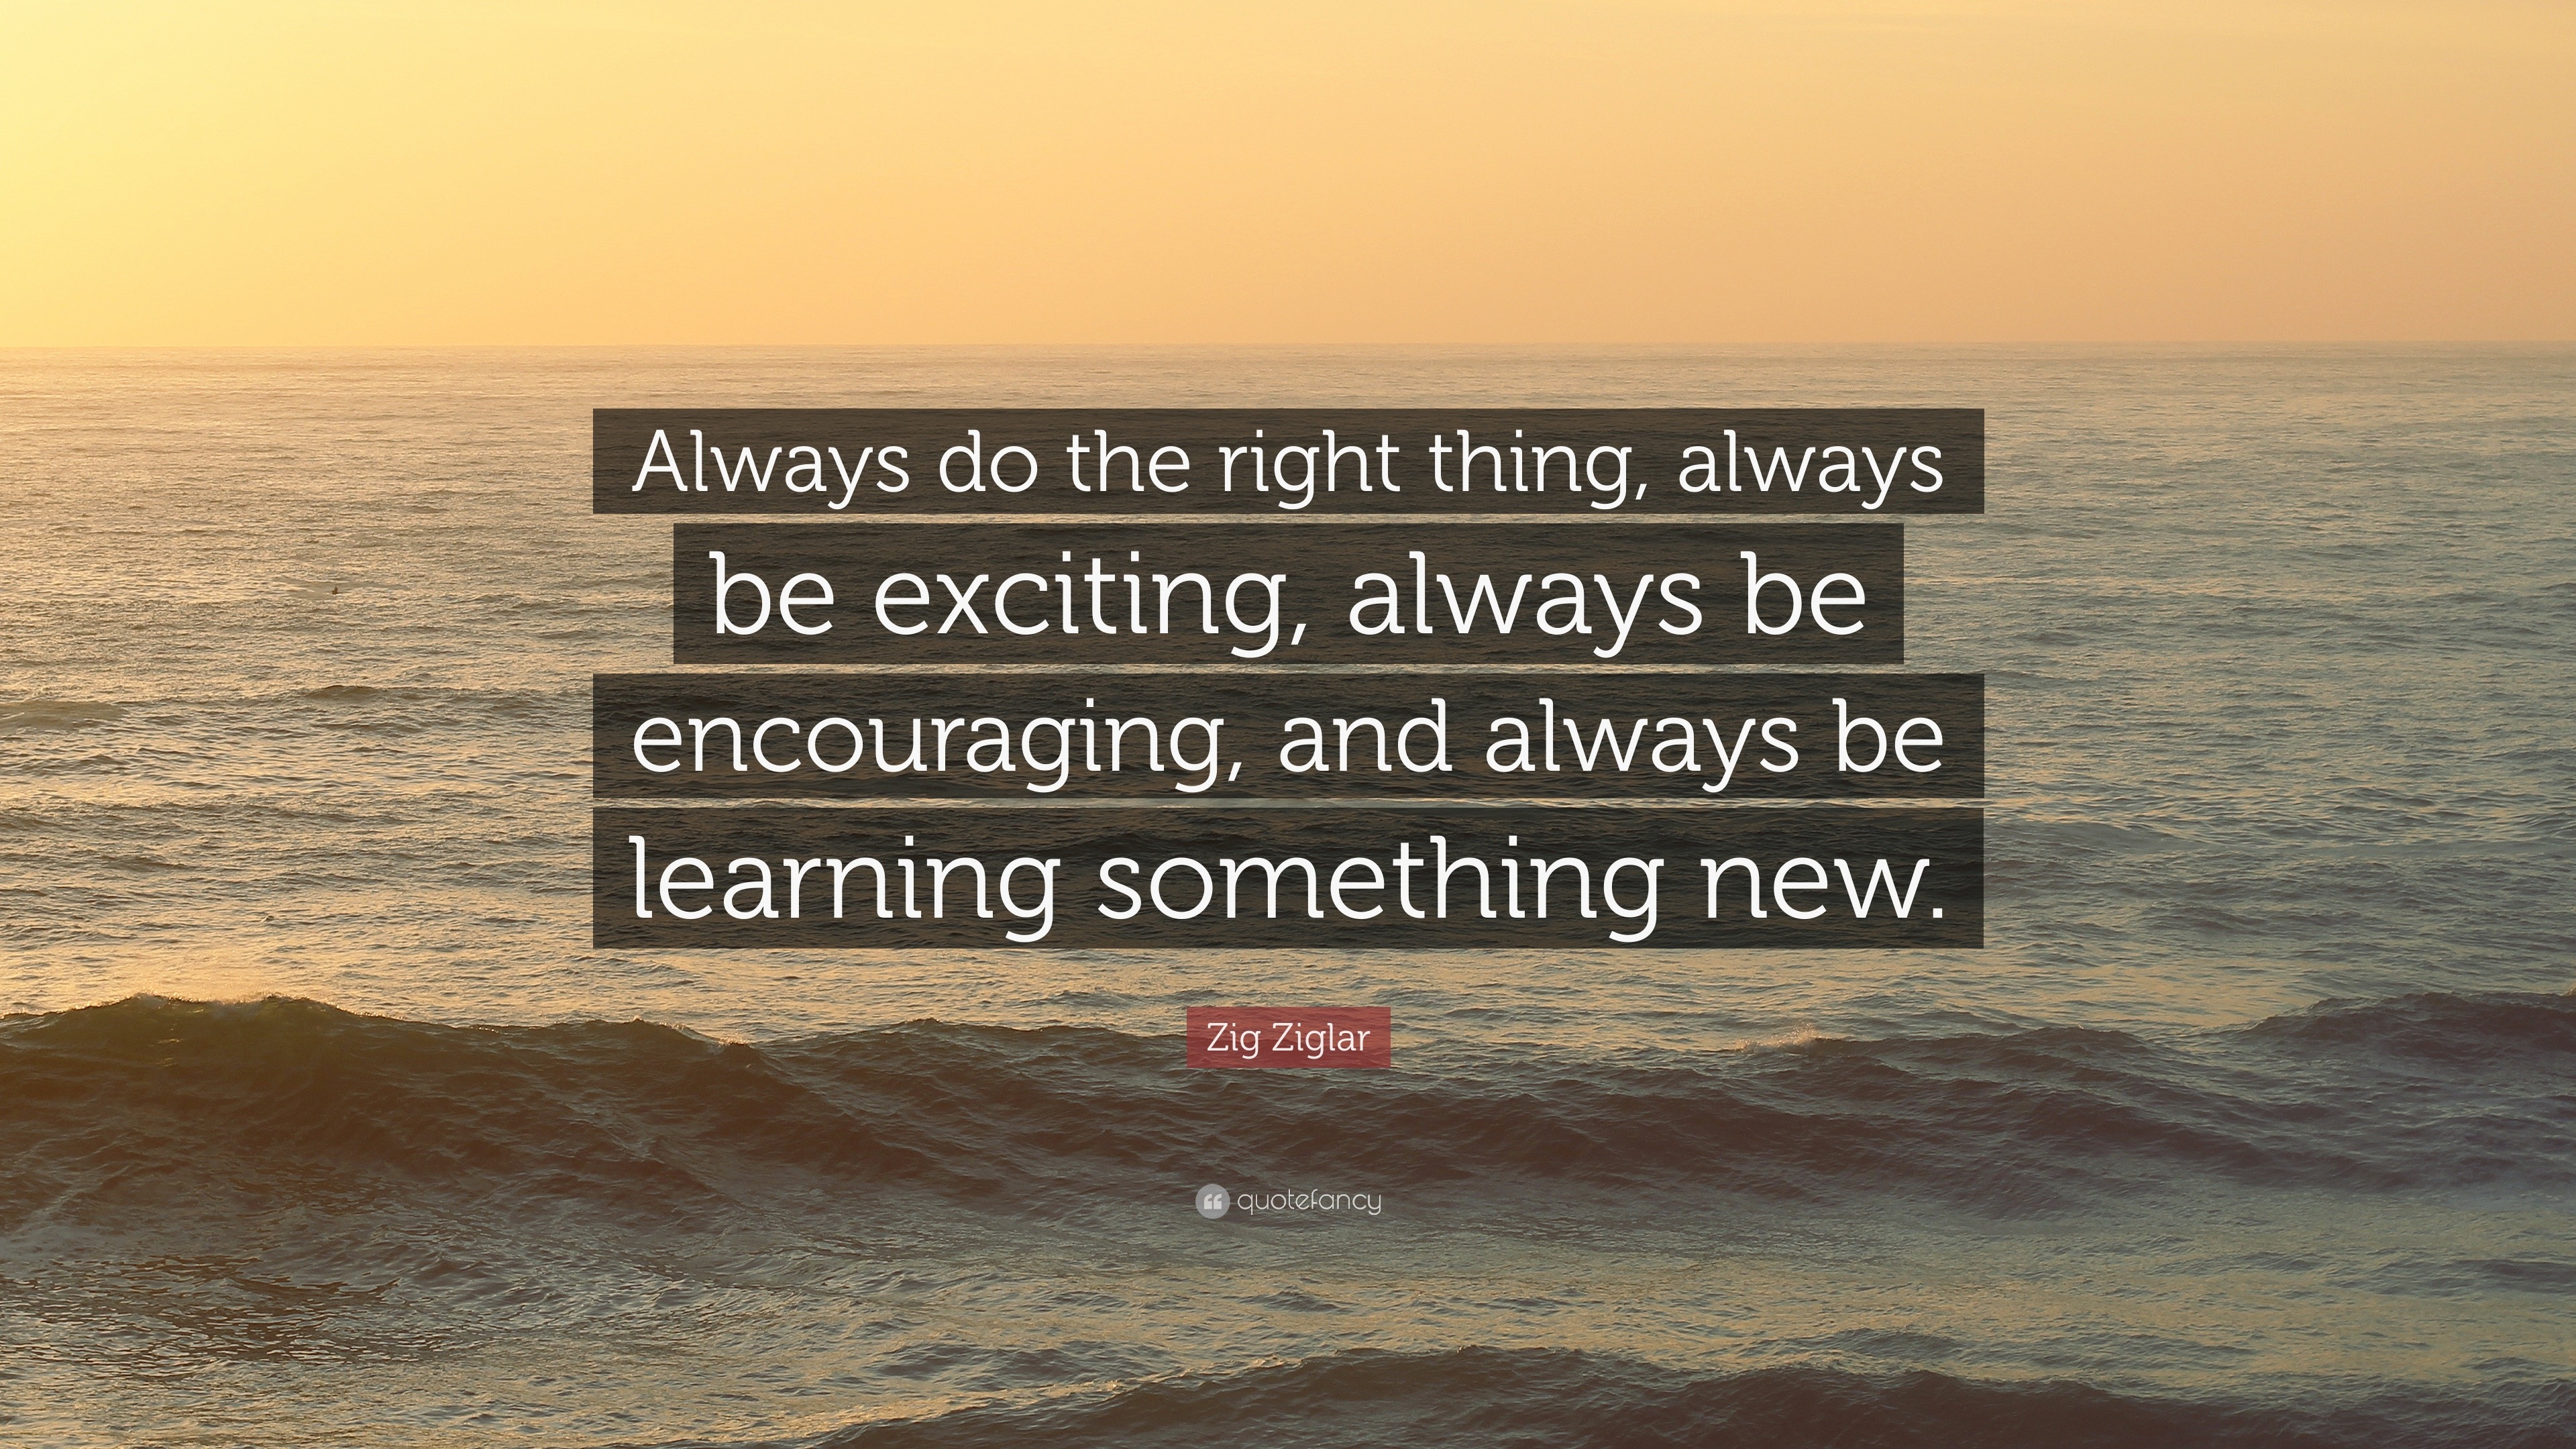 Zig Ziglar Quote: "Always do the right thing, always be exciting, always be encouraging, and ...